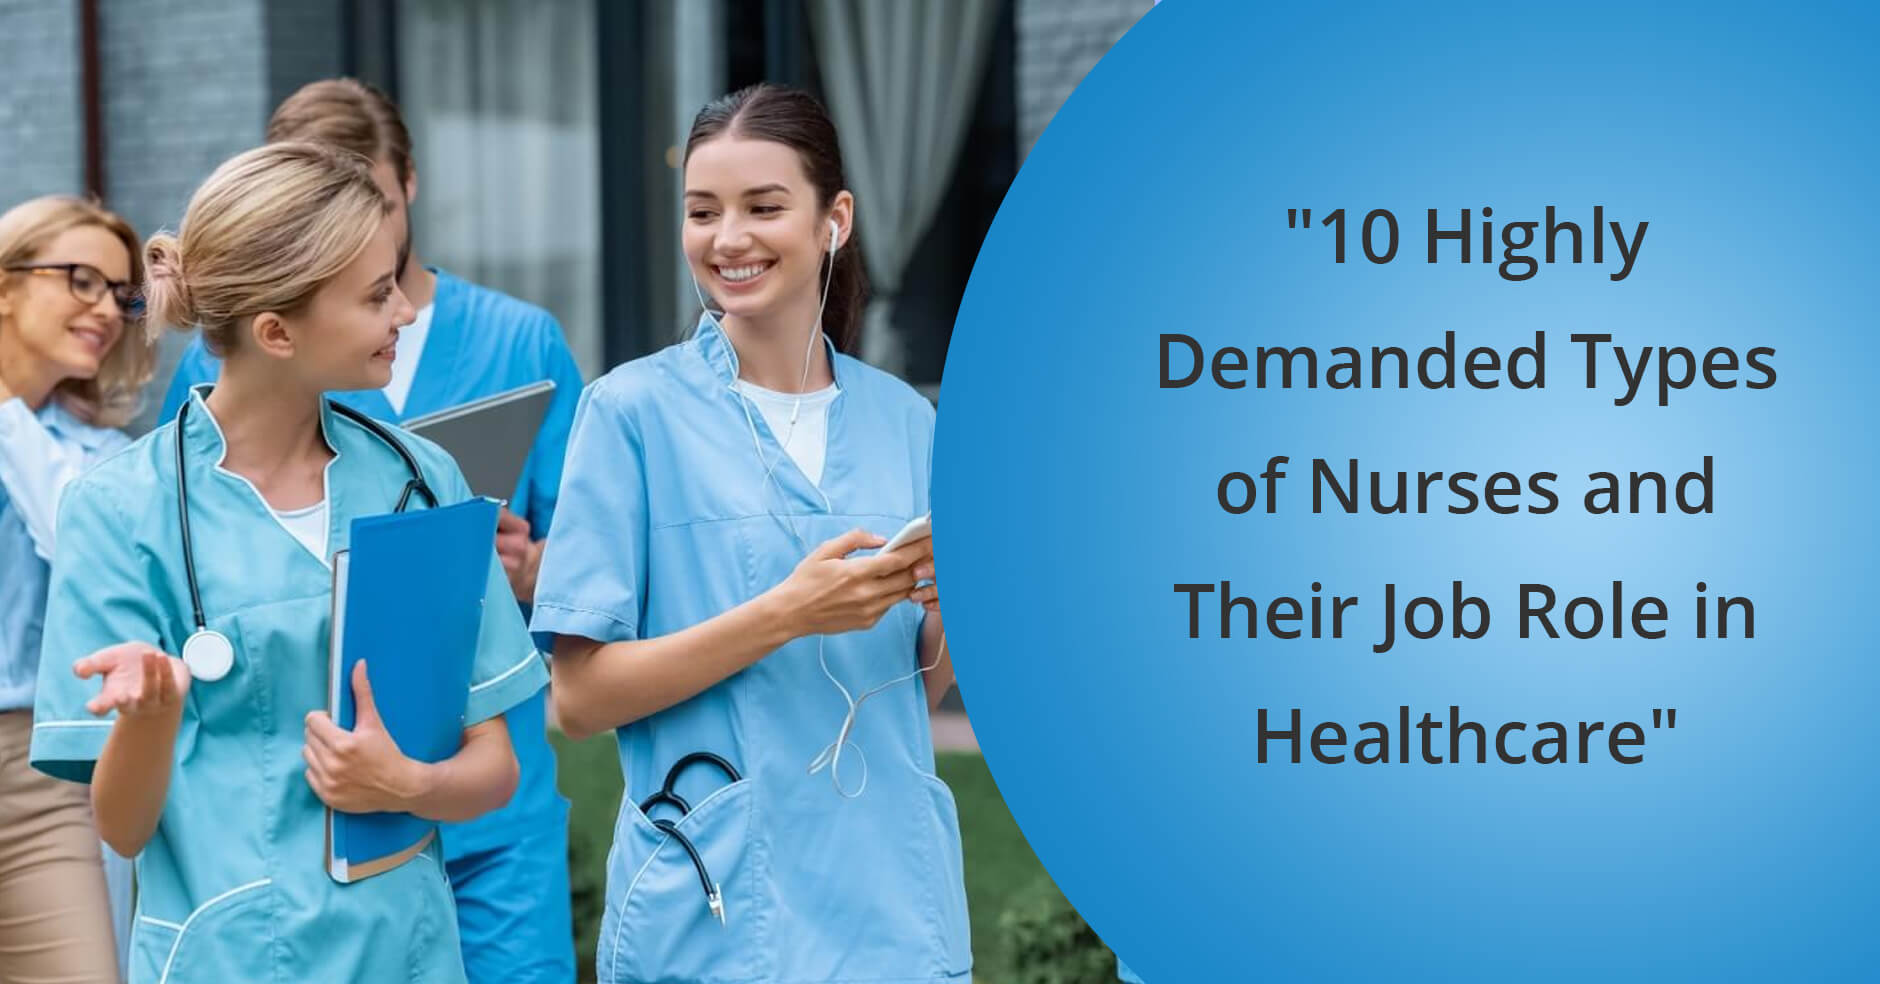 10 Highly Demanded Types of Nurses and Their Job Role in Healthcare